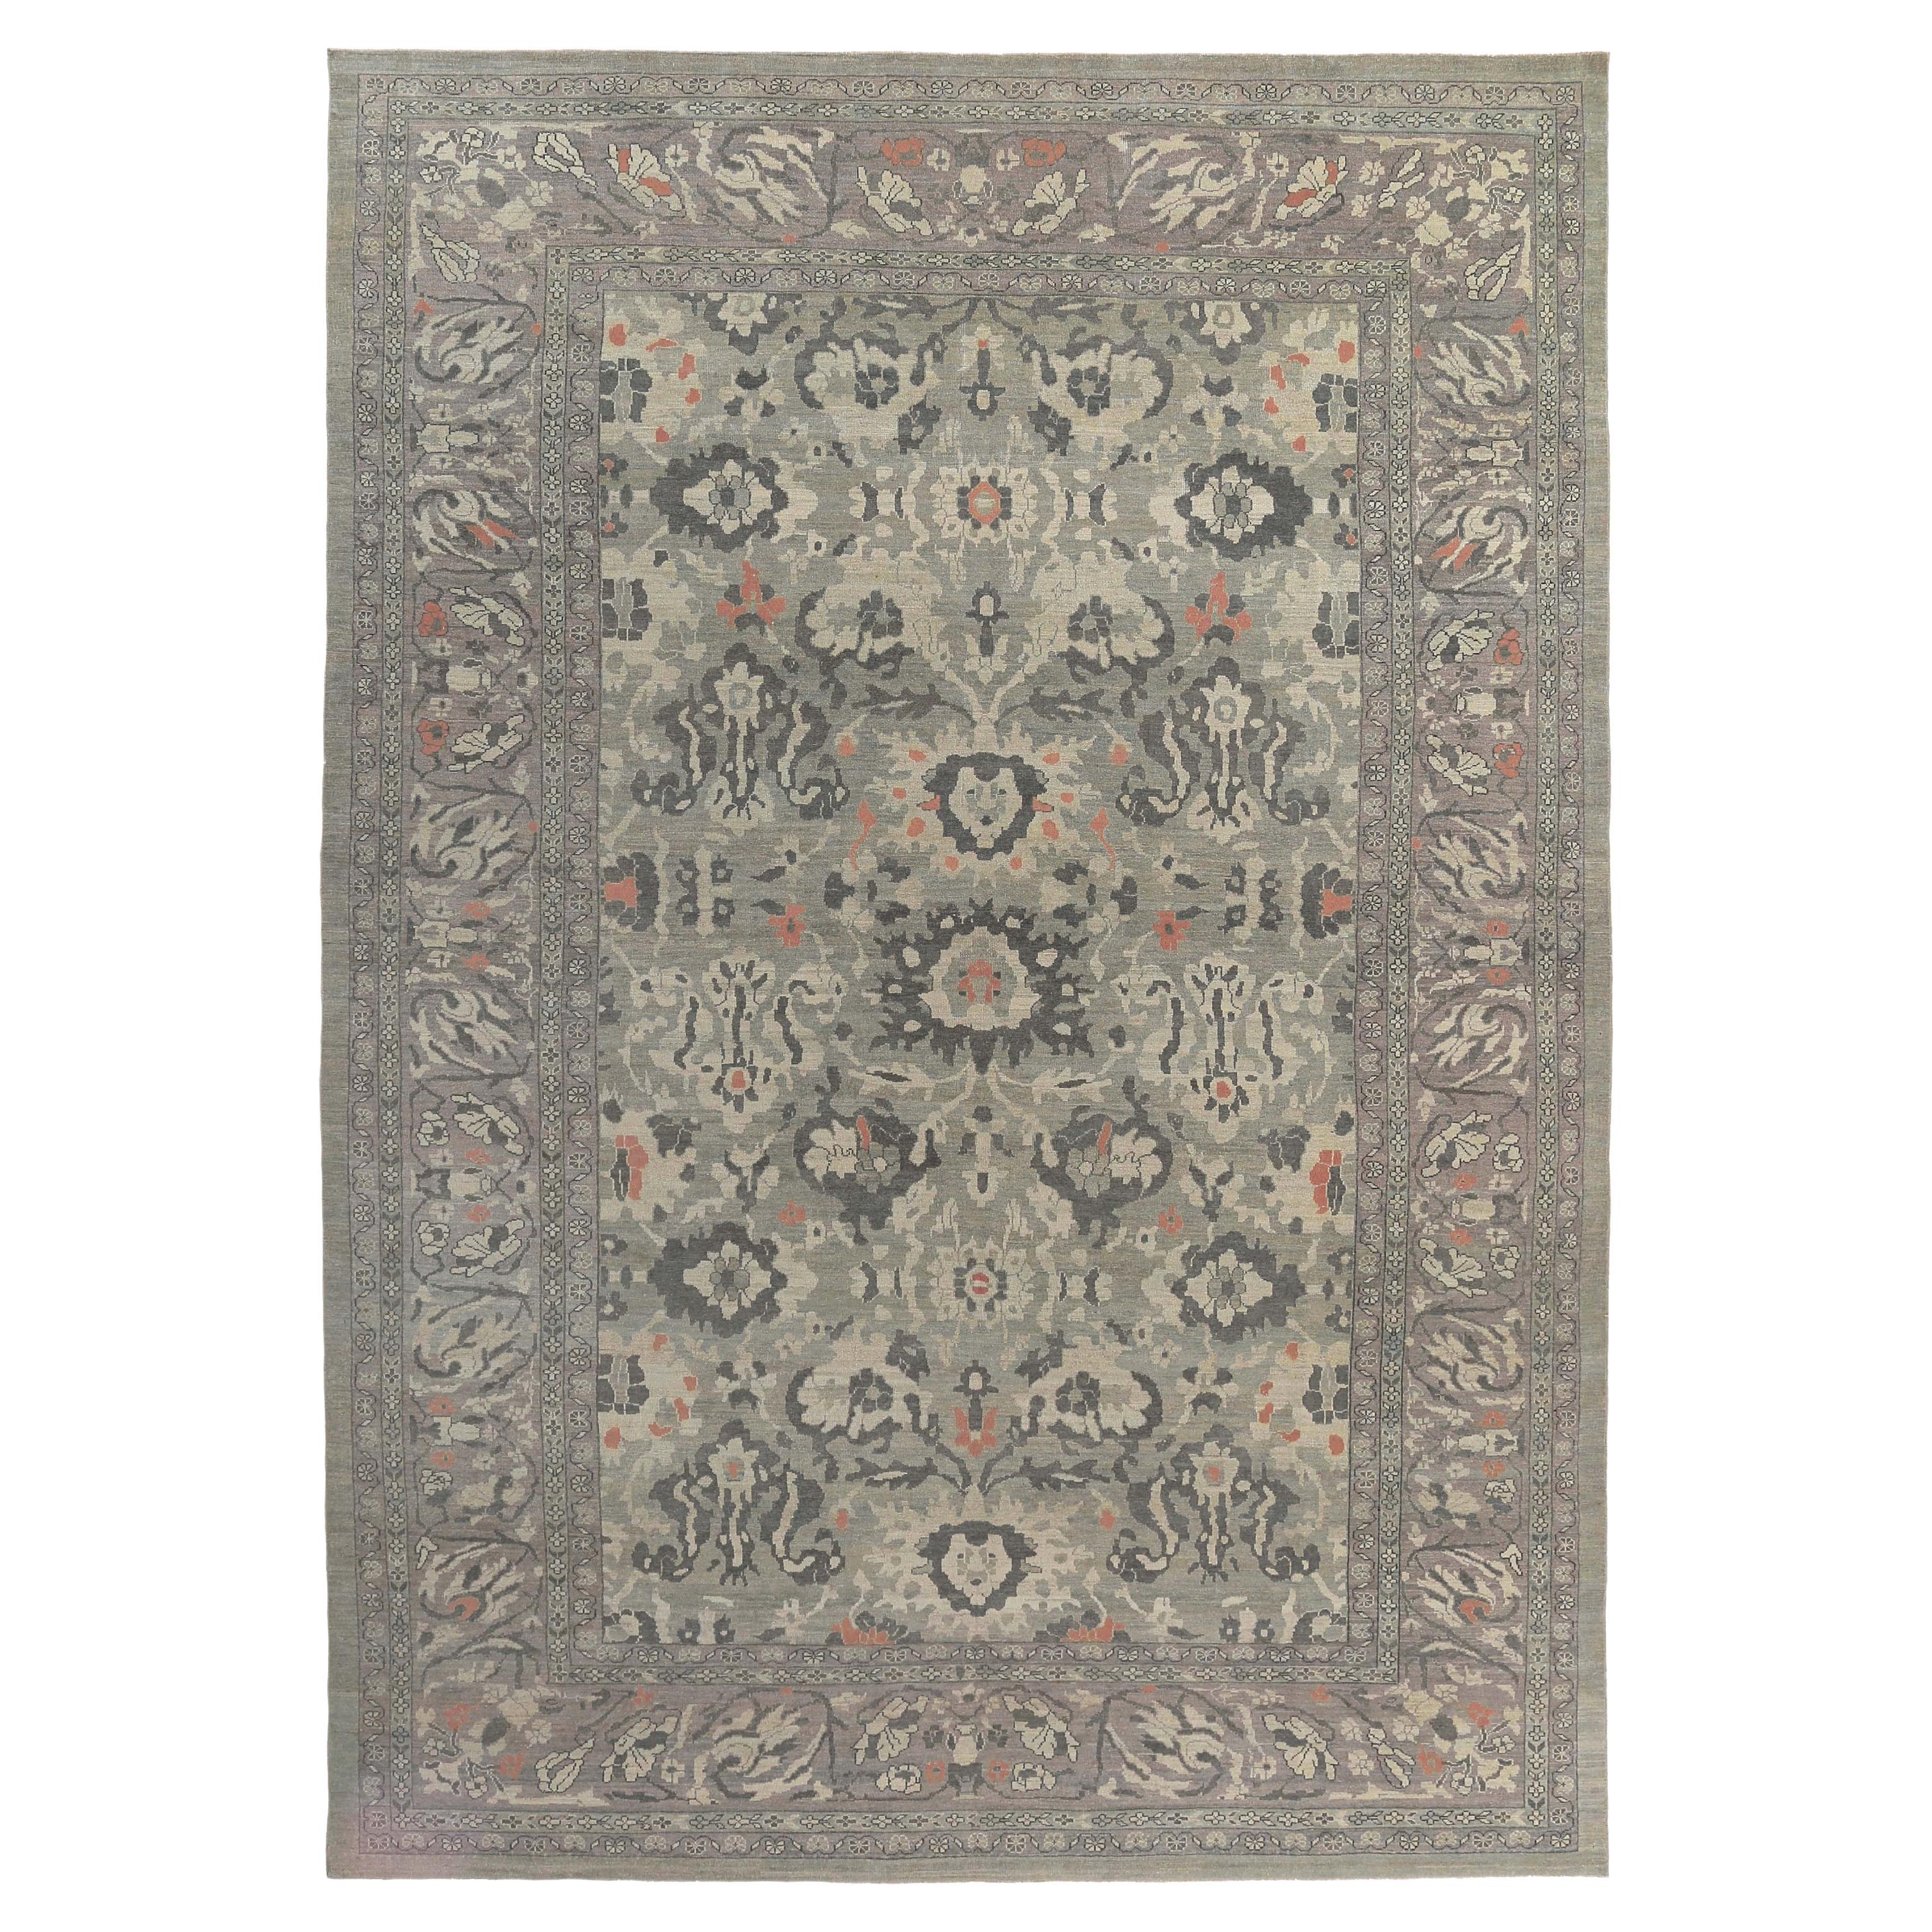 Handmade Turkish Sultanabad Rug with Grey and Orange Tones For Sale